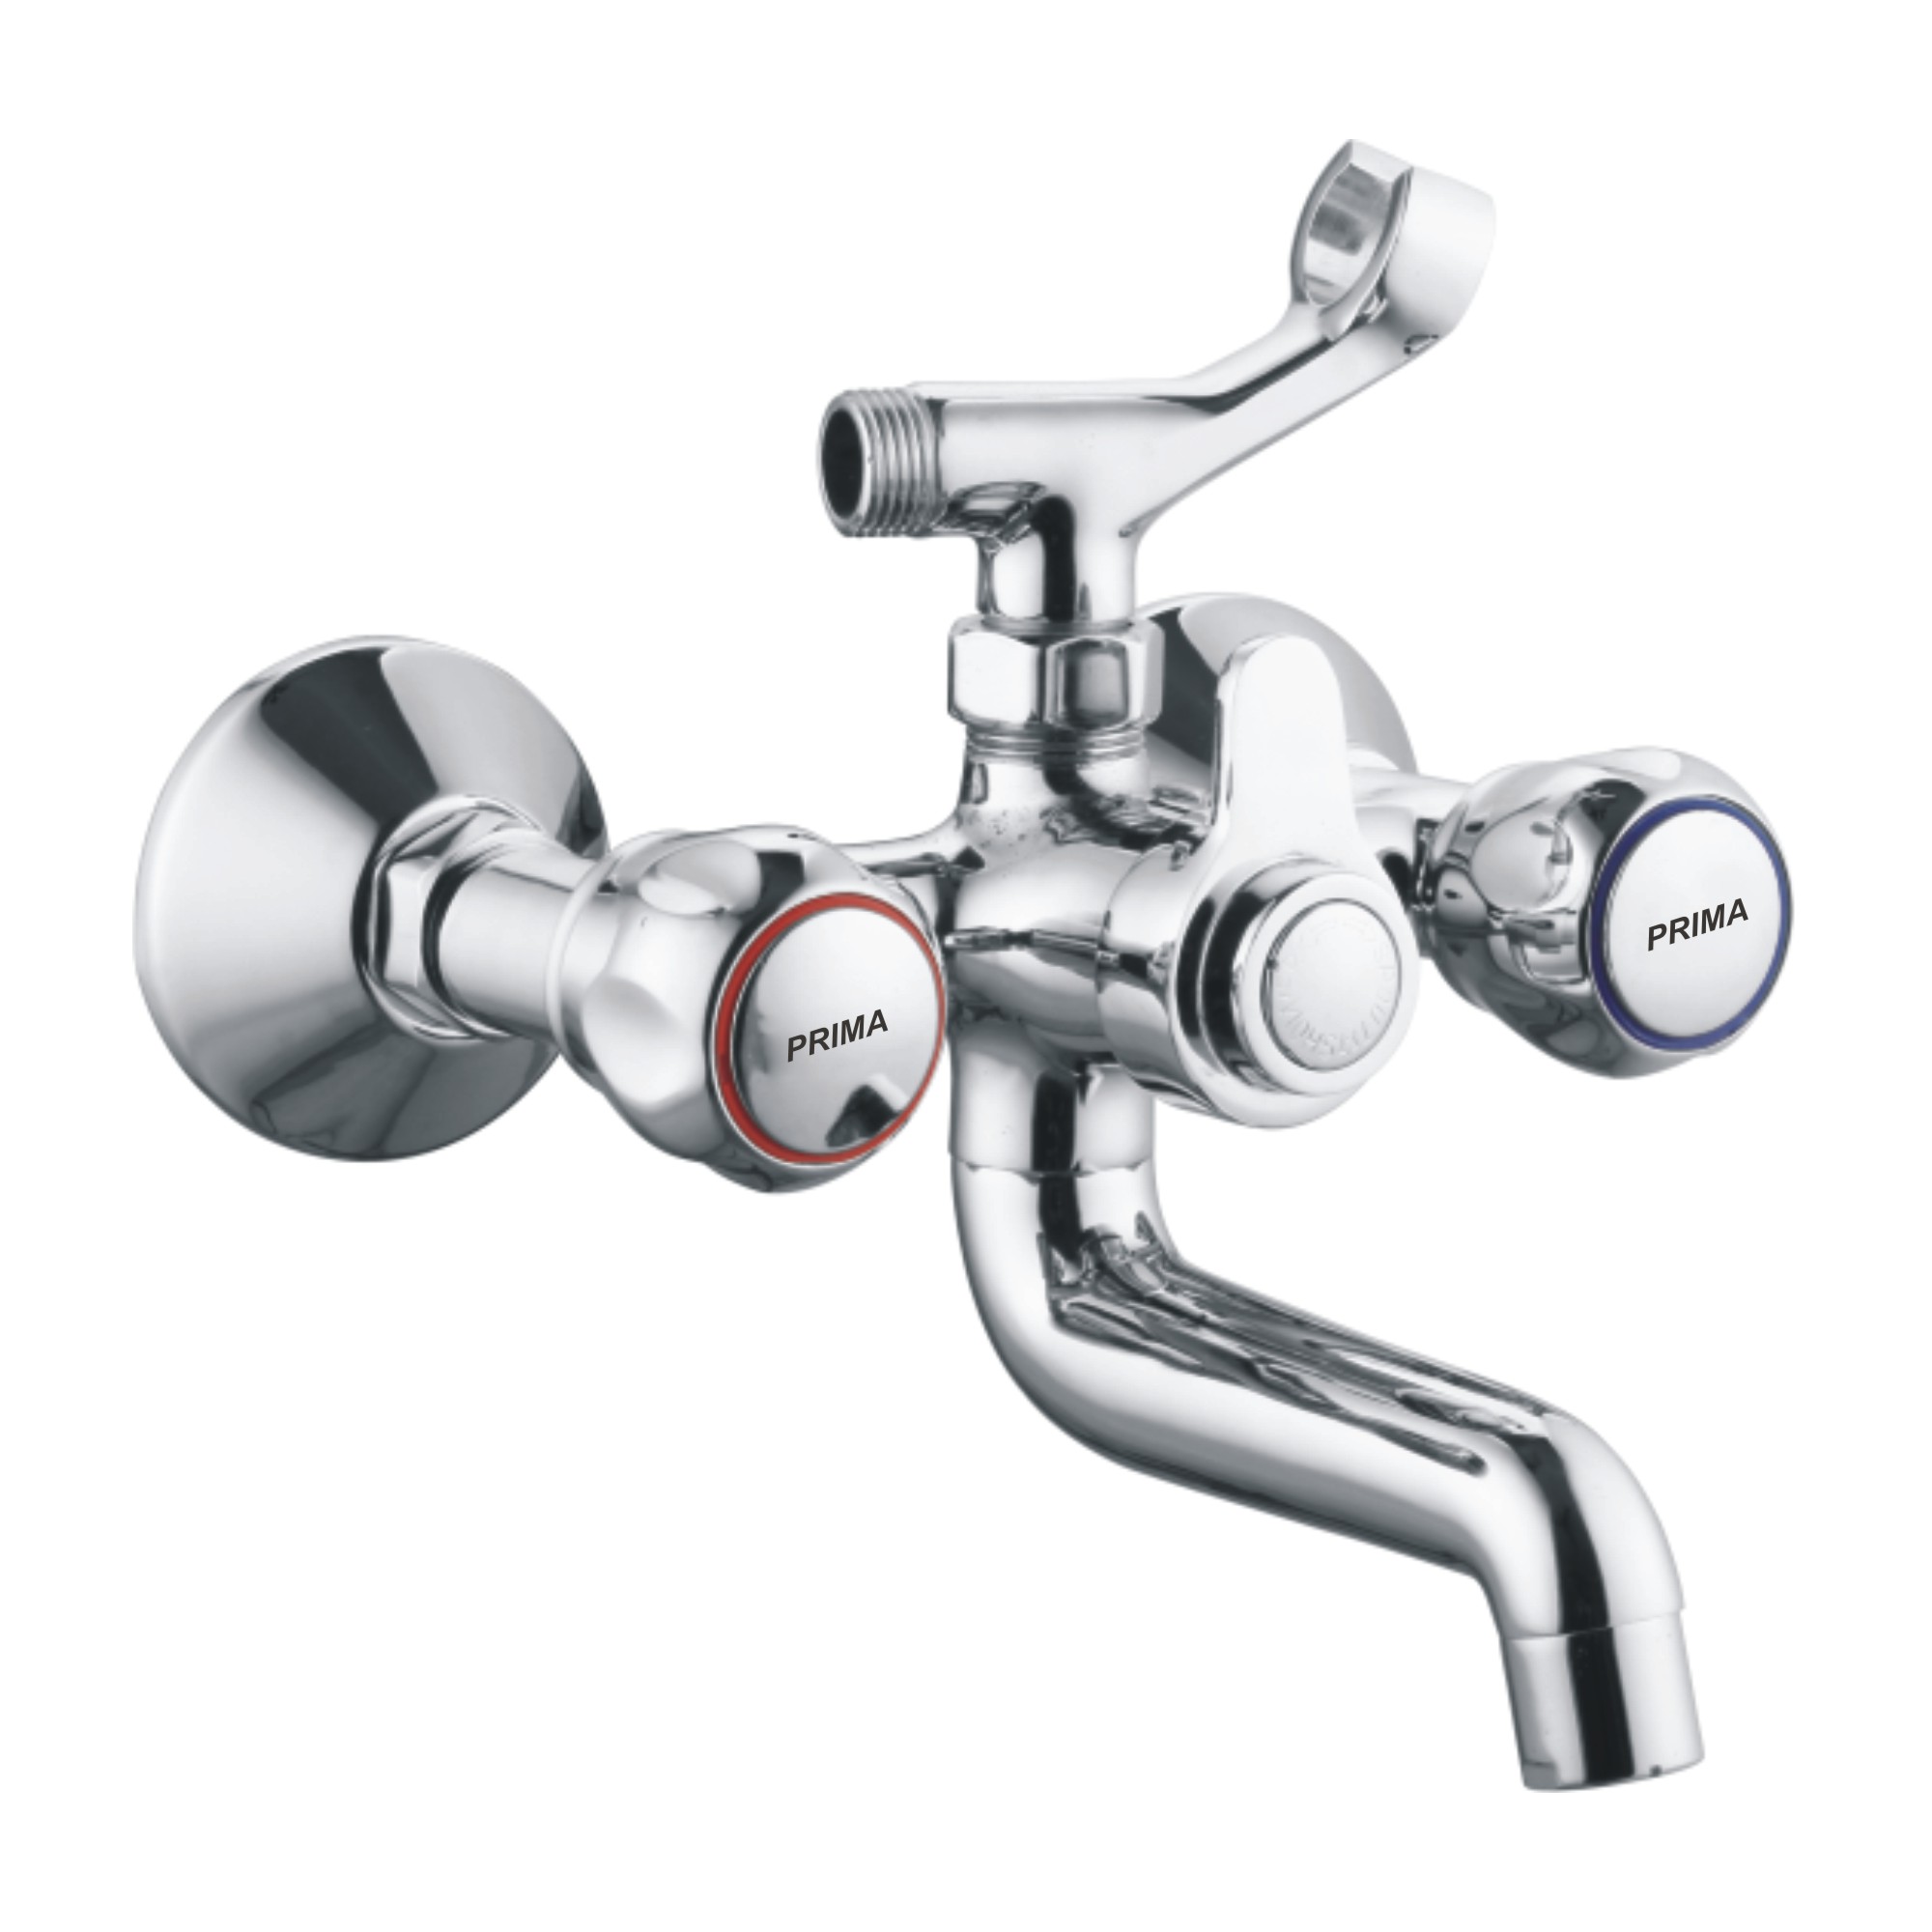 C.P Wall Mixer  with Tele Shower & Flexible tube